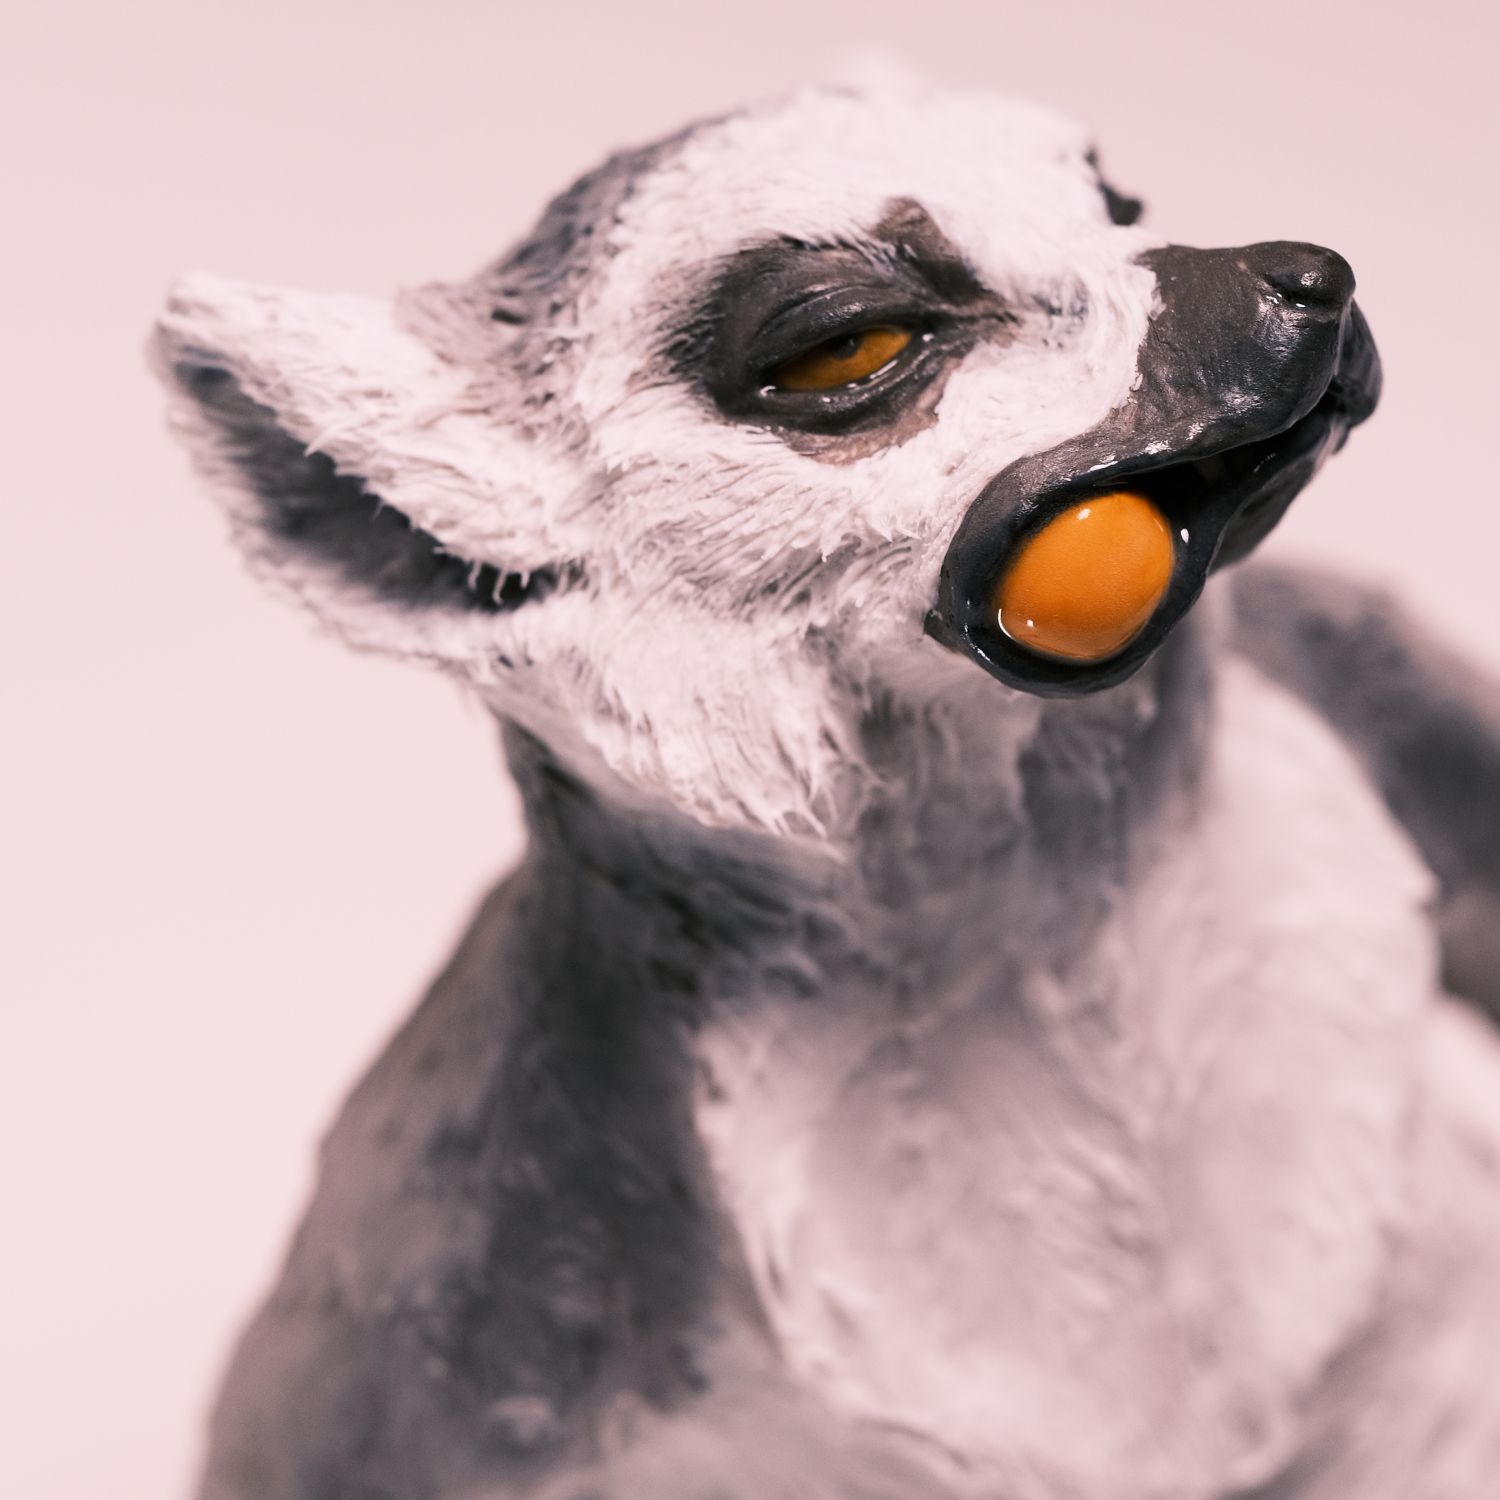 Peidi Wang: Lemur with a fruit in its mouth – Not For Sale Product Image 5 of 5